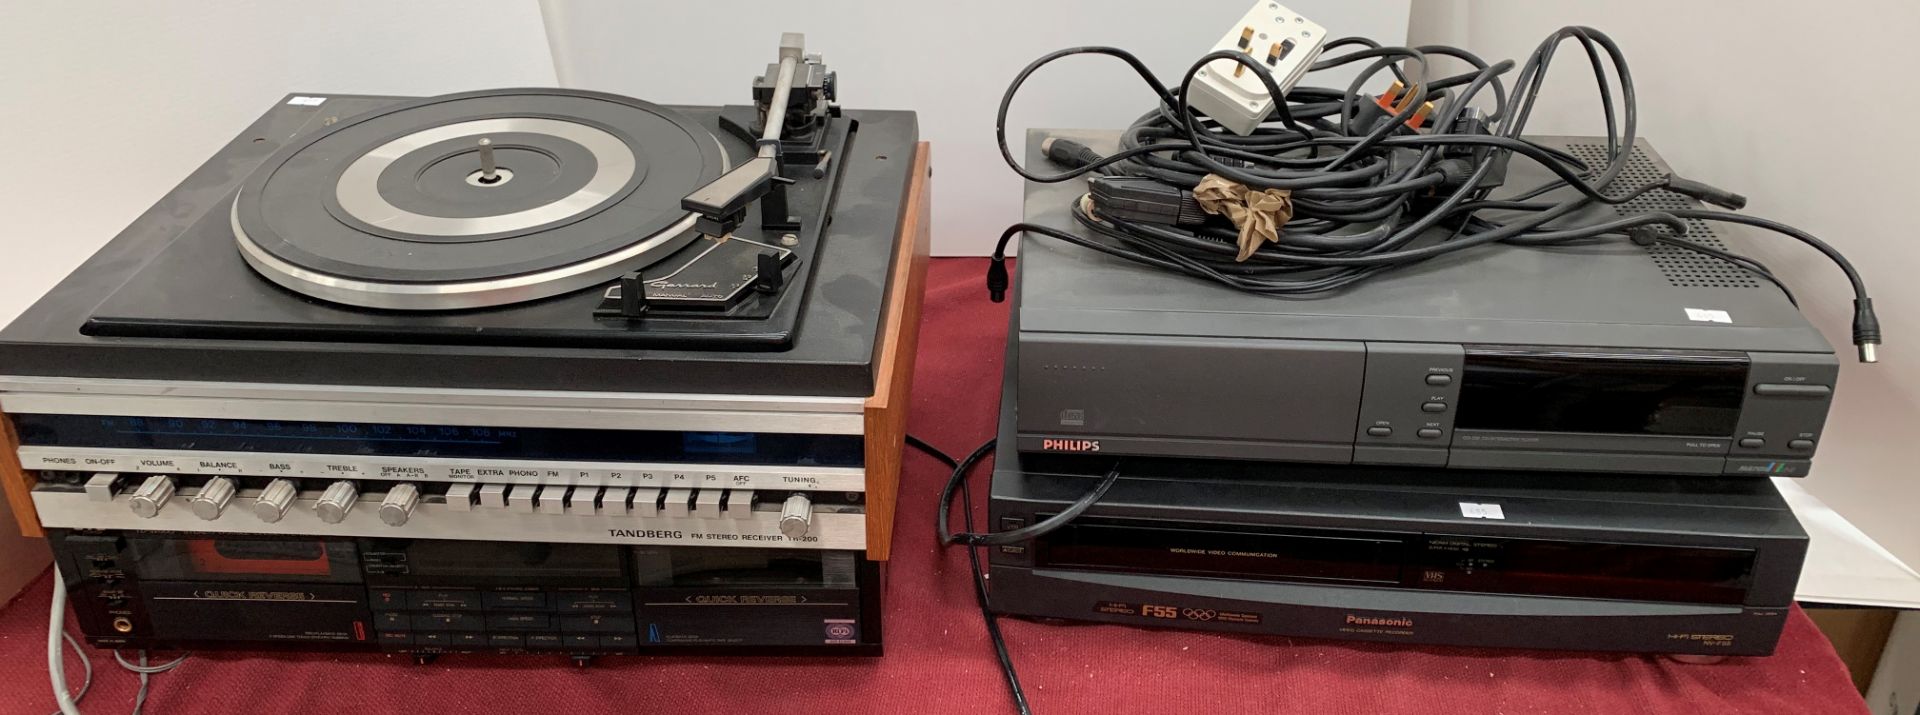 A Tanberg TR-200 FMK stereo receiver with a Garrard SP25 MK3 turntable,